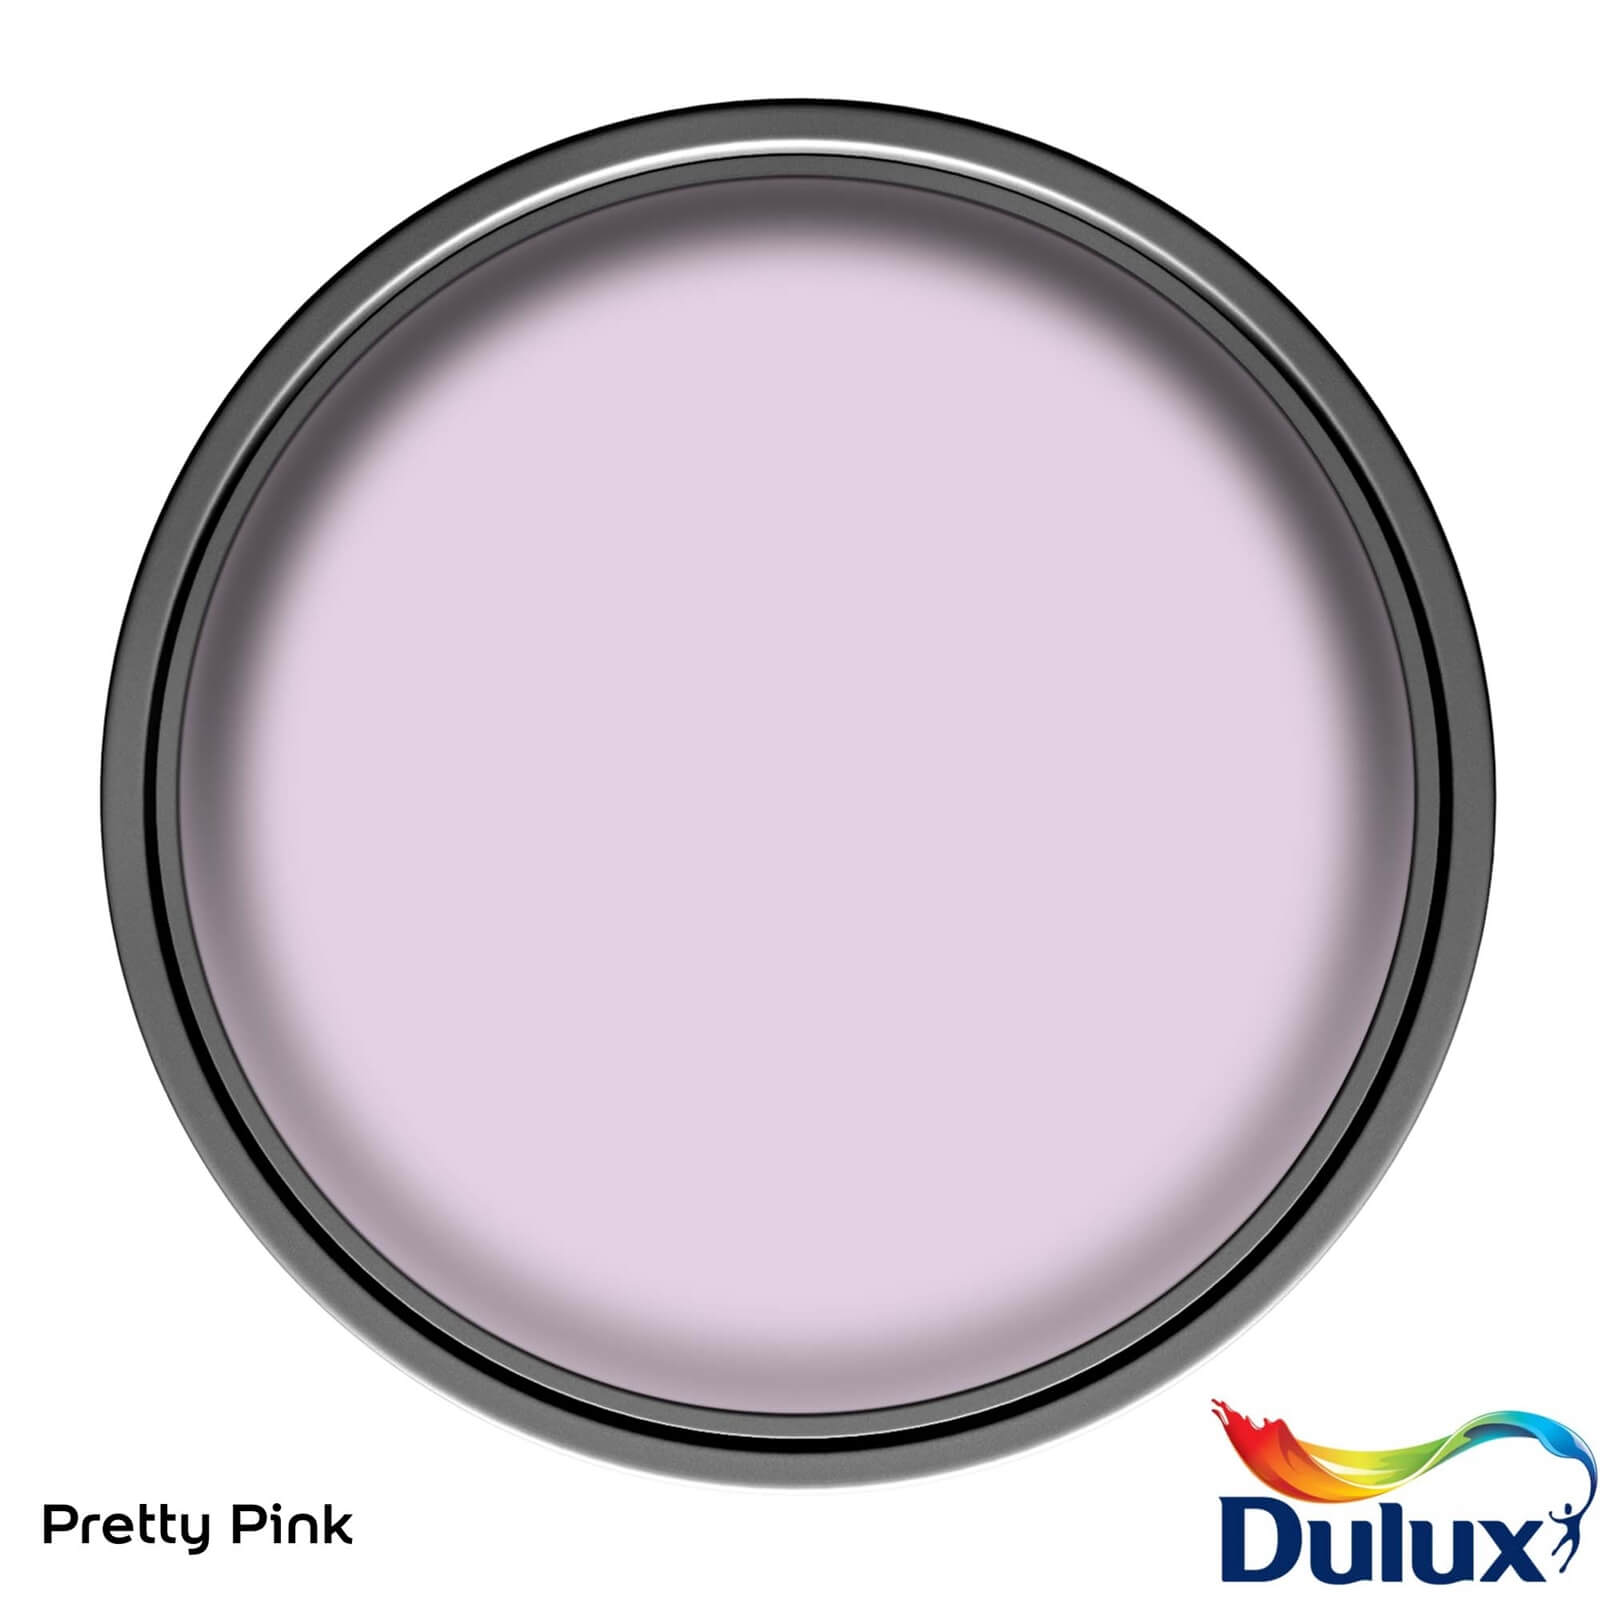 Dulux Quick Dry Satinwood Paint Pretty Pink - 750ml